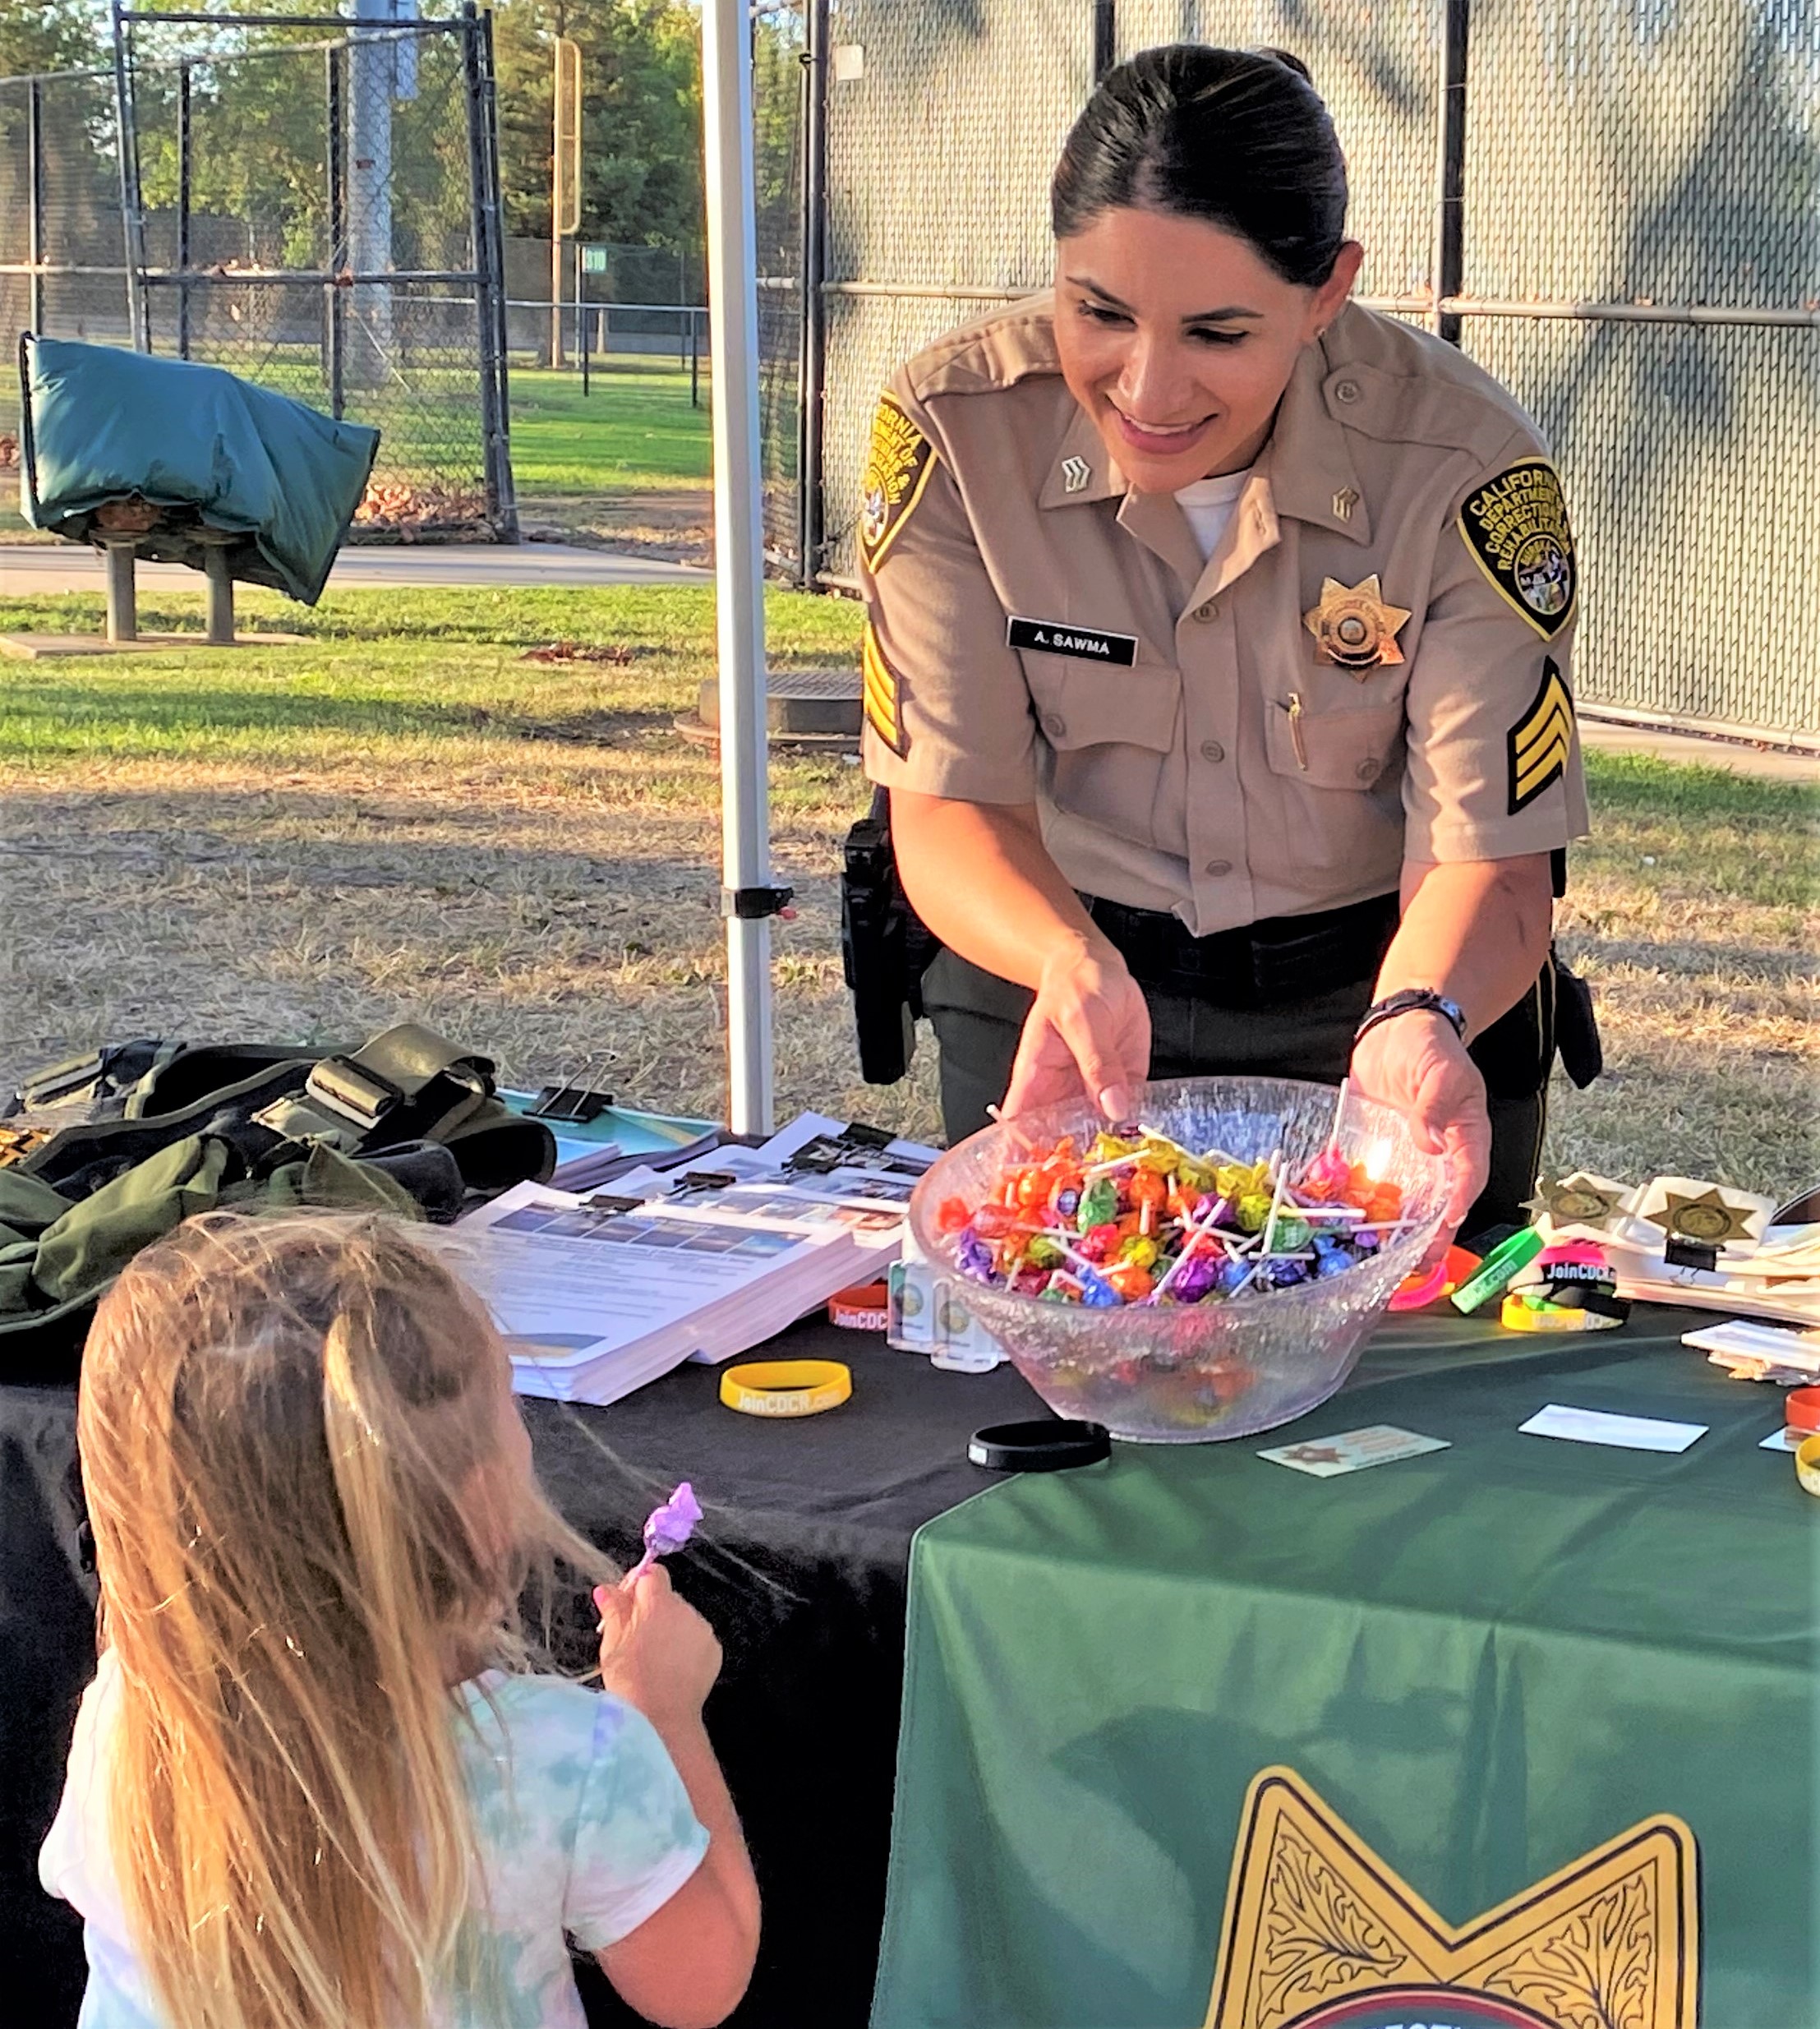 Correctional sergeant holds a bowls of candy for a child.